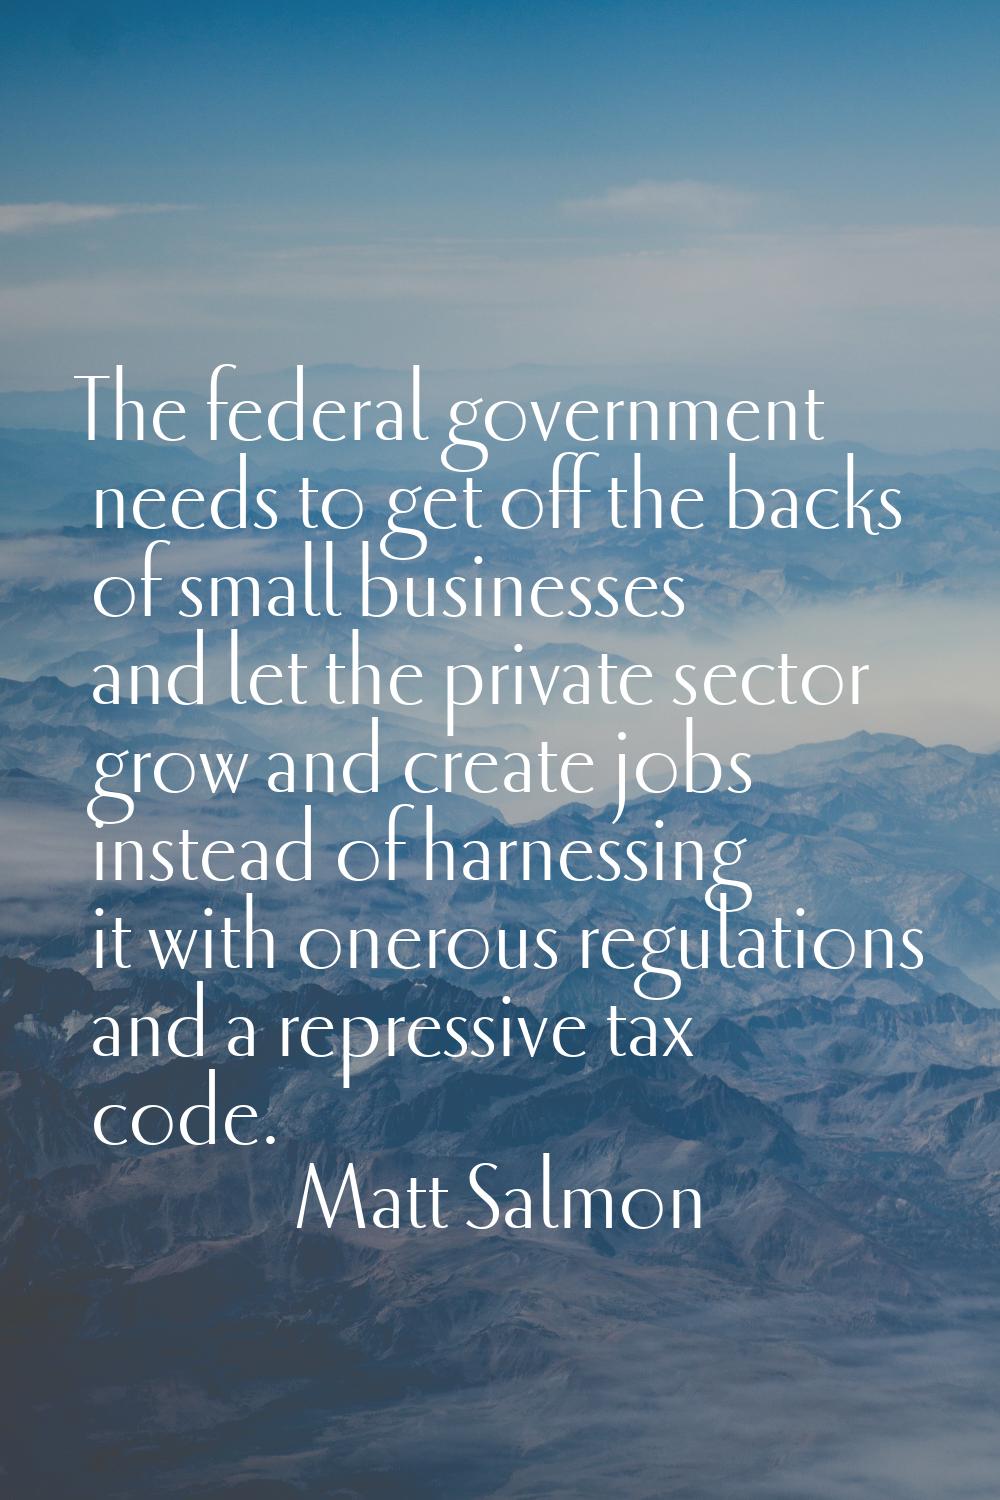 The federal government needs to get off the backs of small businesses and let the private sector gr